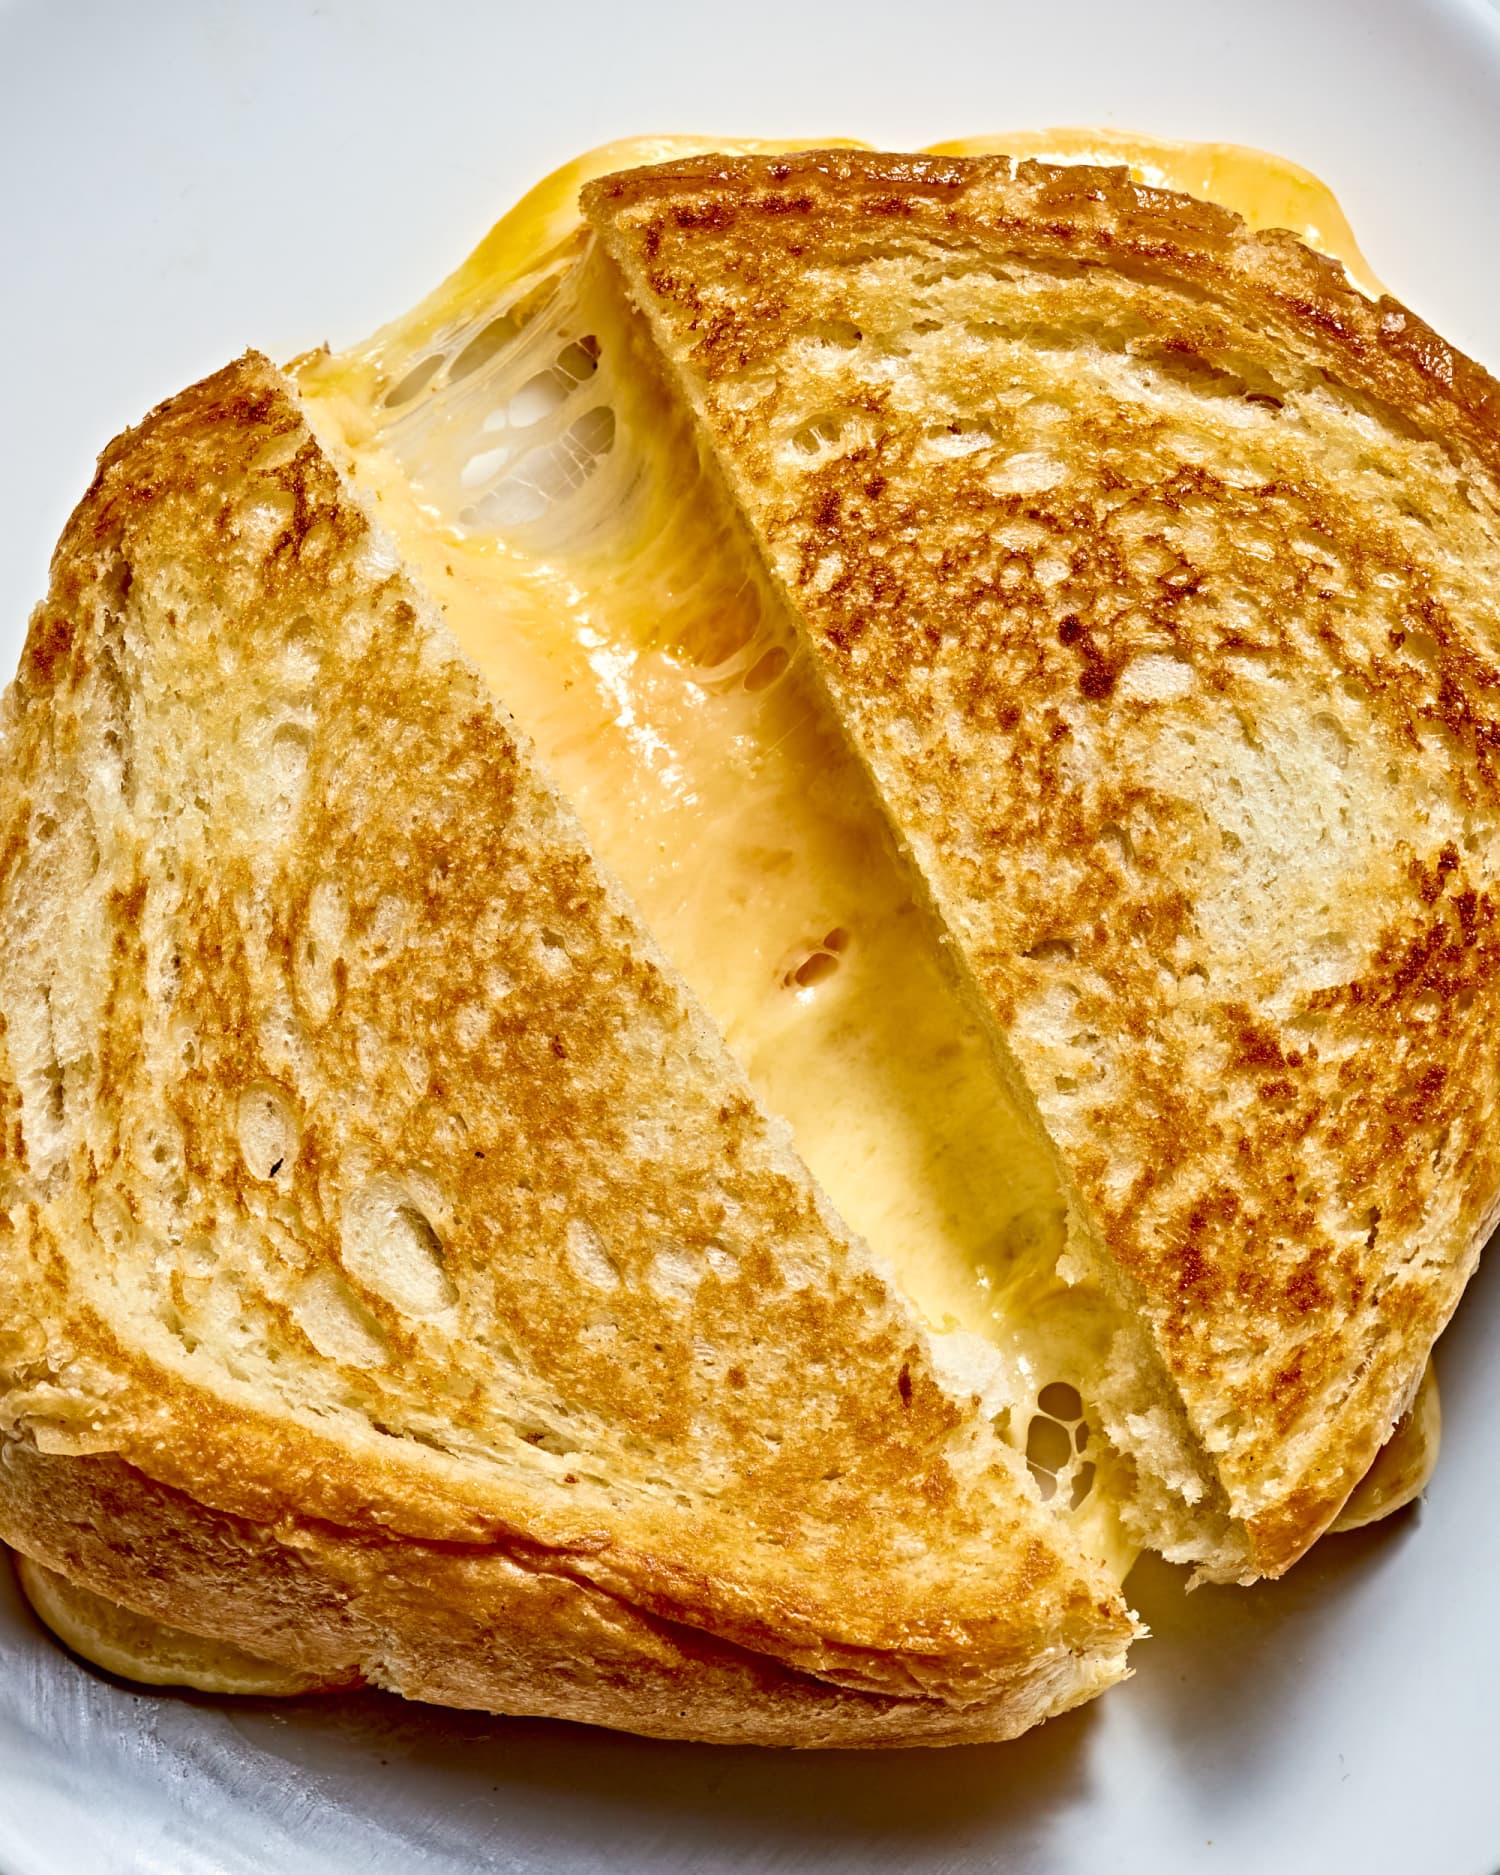 I Tried the Internet’s Most Popular Grilled Cheese Recipe